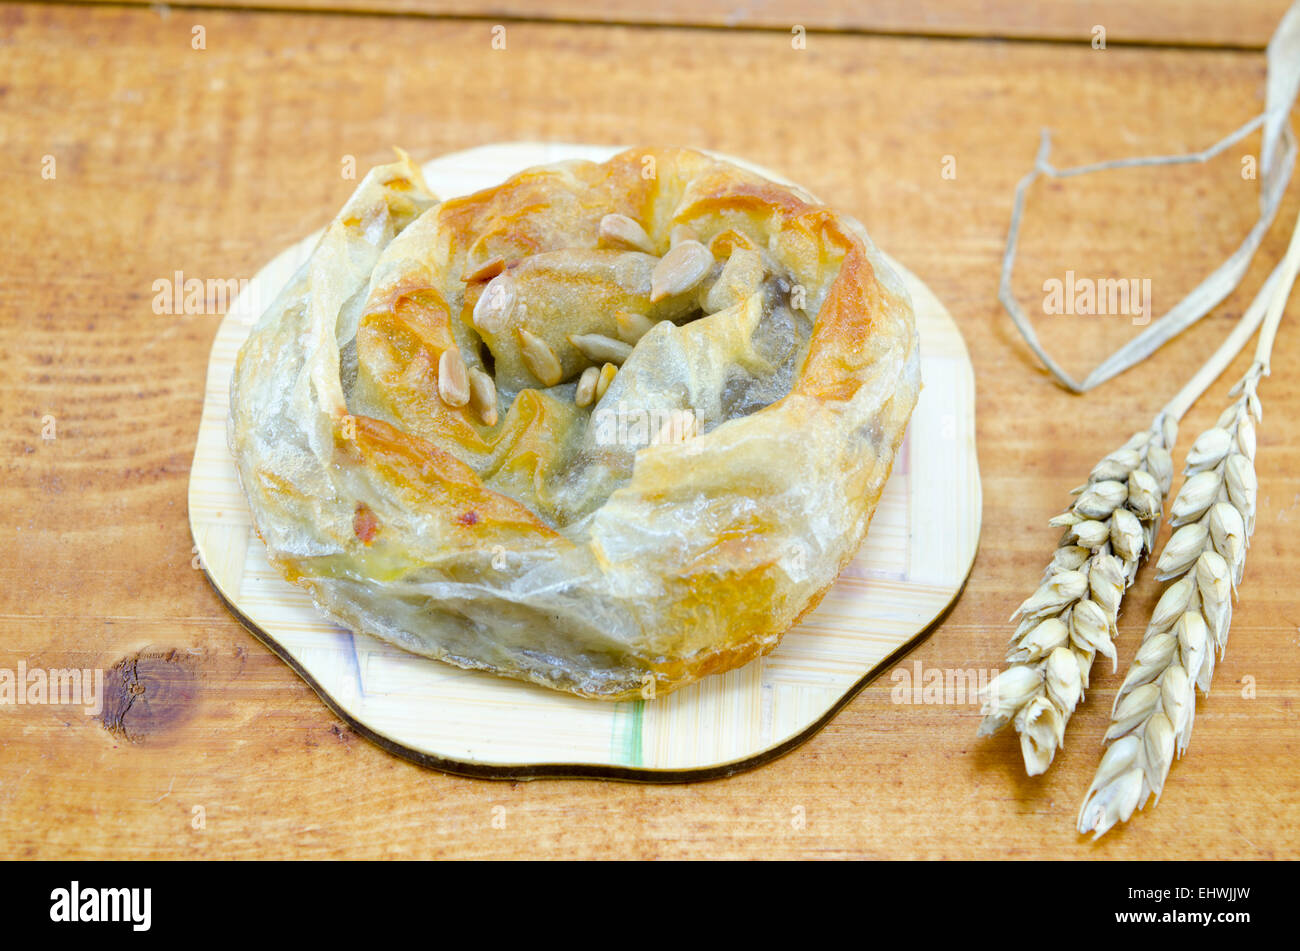 Savory meat pie with seeds on a wooden table decorated with wheat sticks Stock Photo